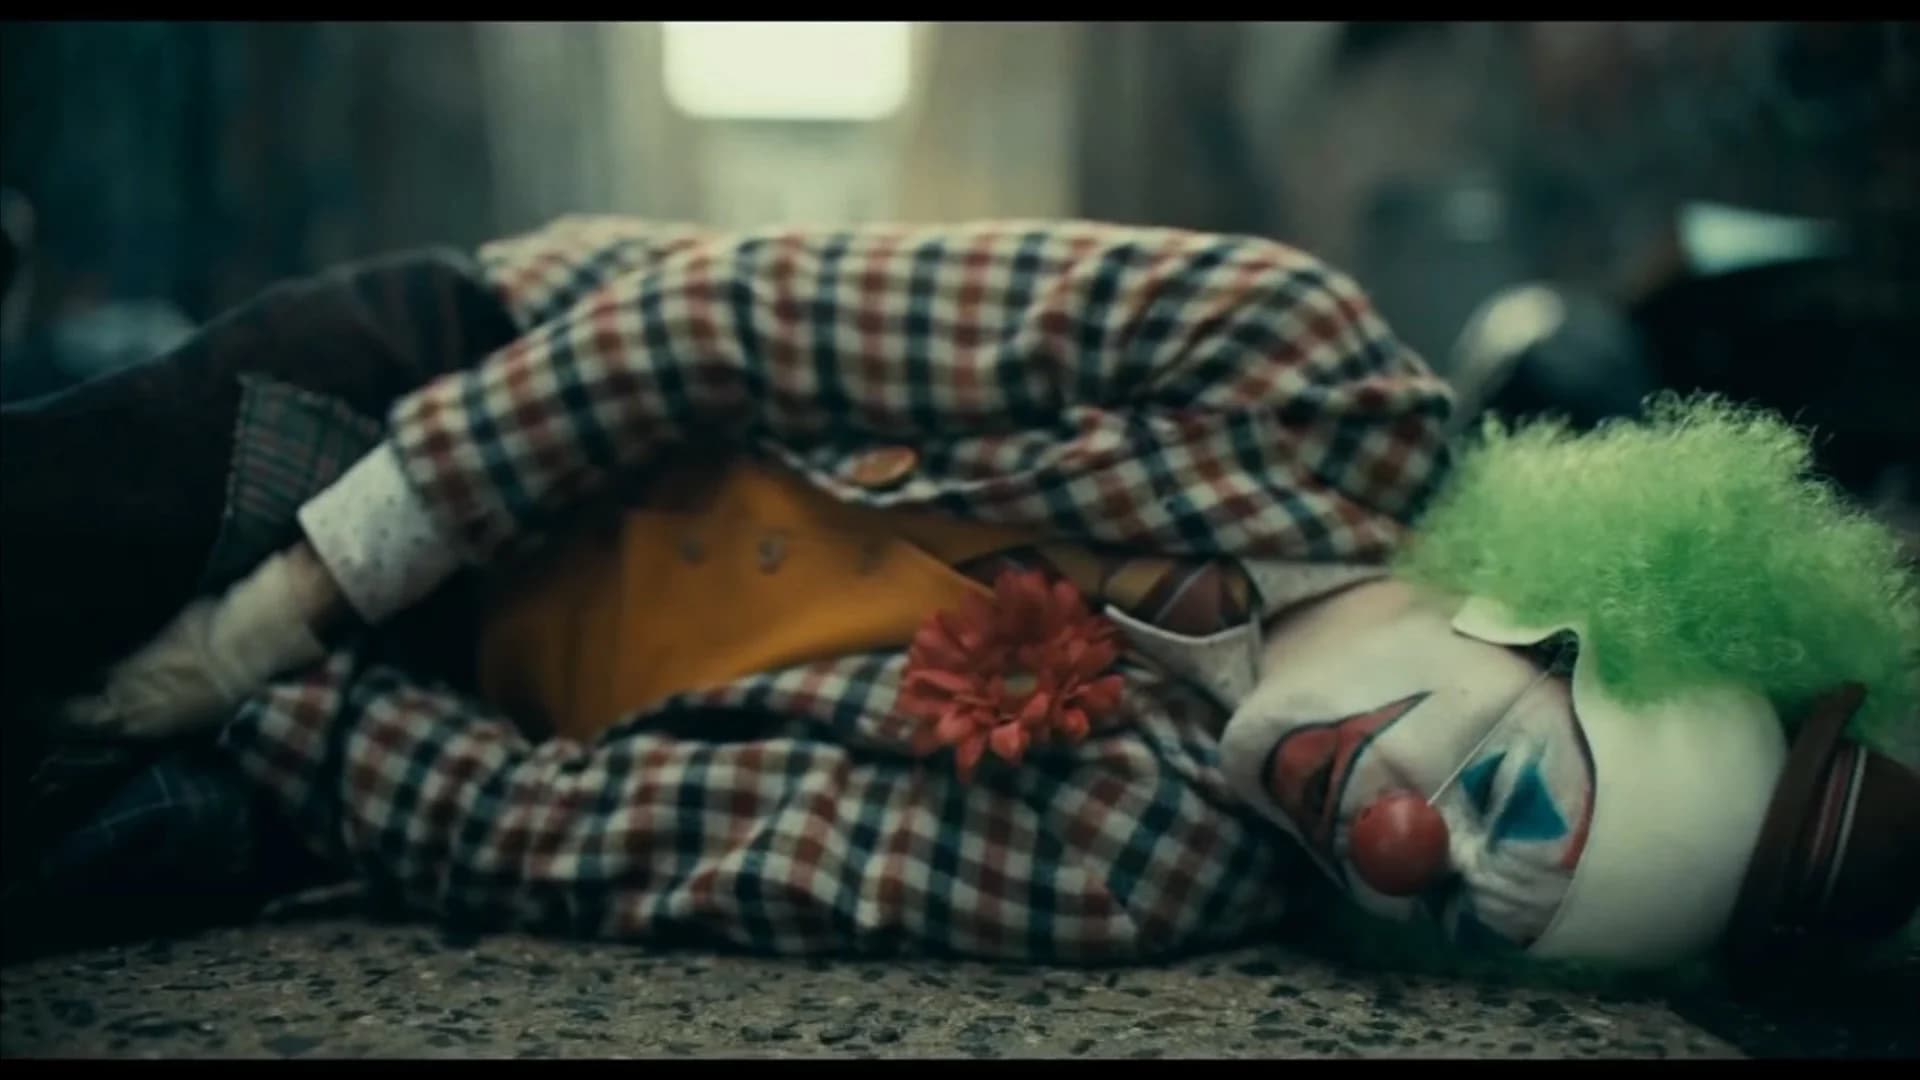 Trailer for new ‘Joker’ film drops and it is creepy